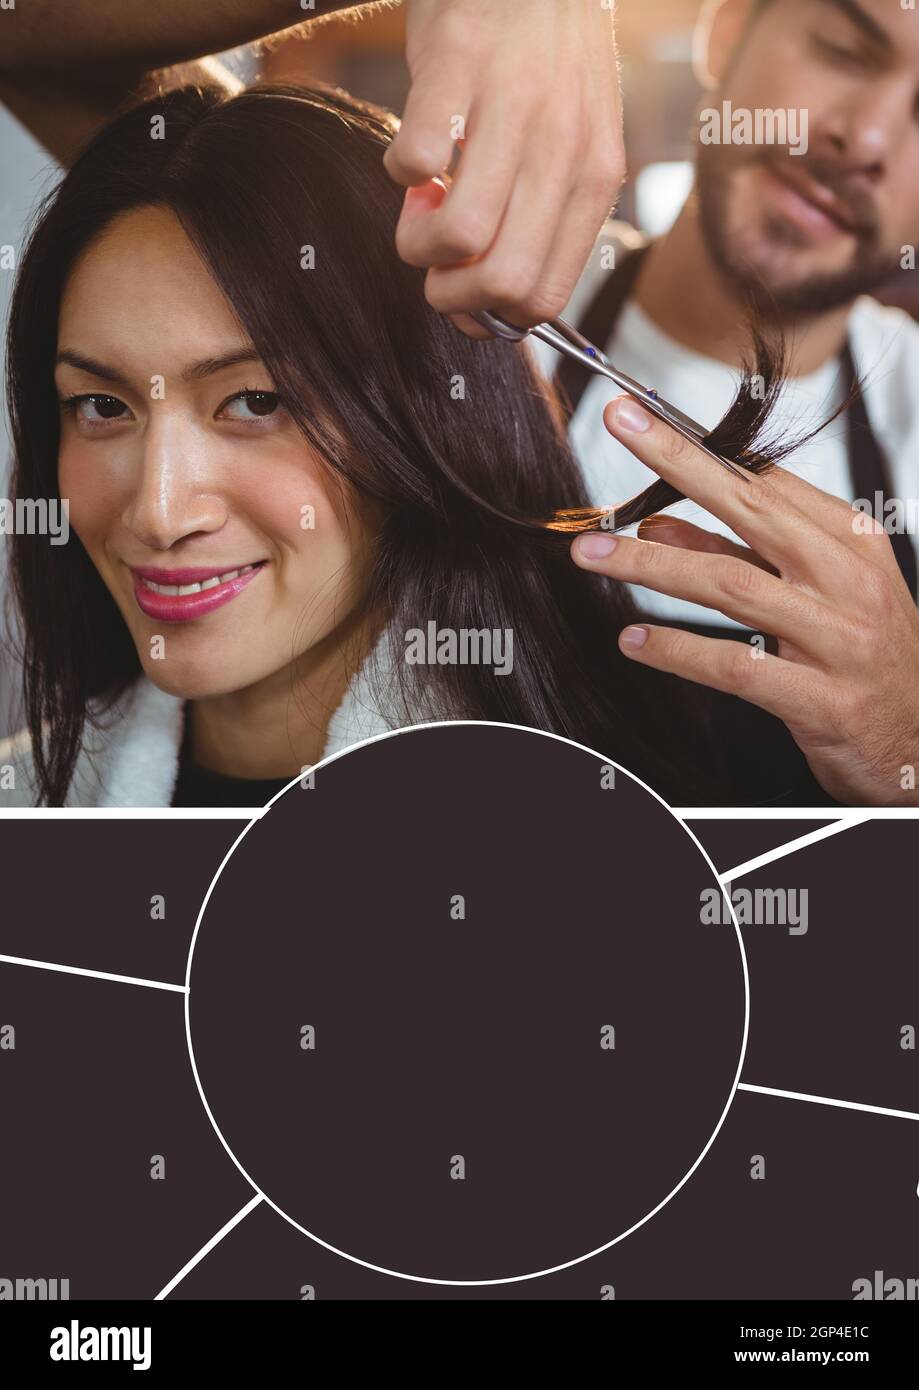 Composition of smiling caucasian woman in hair salon Stock Photo